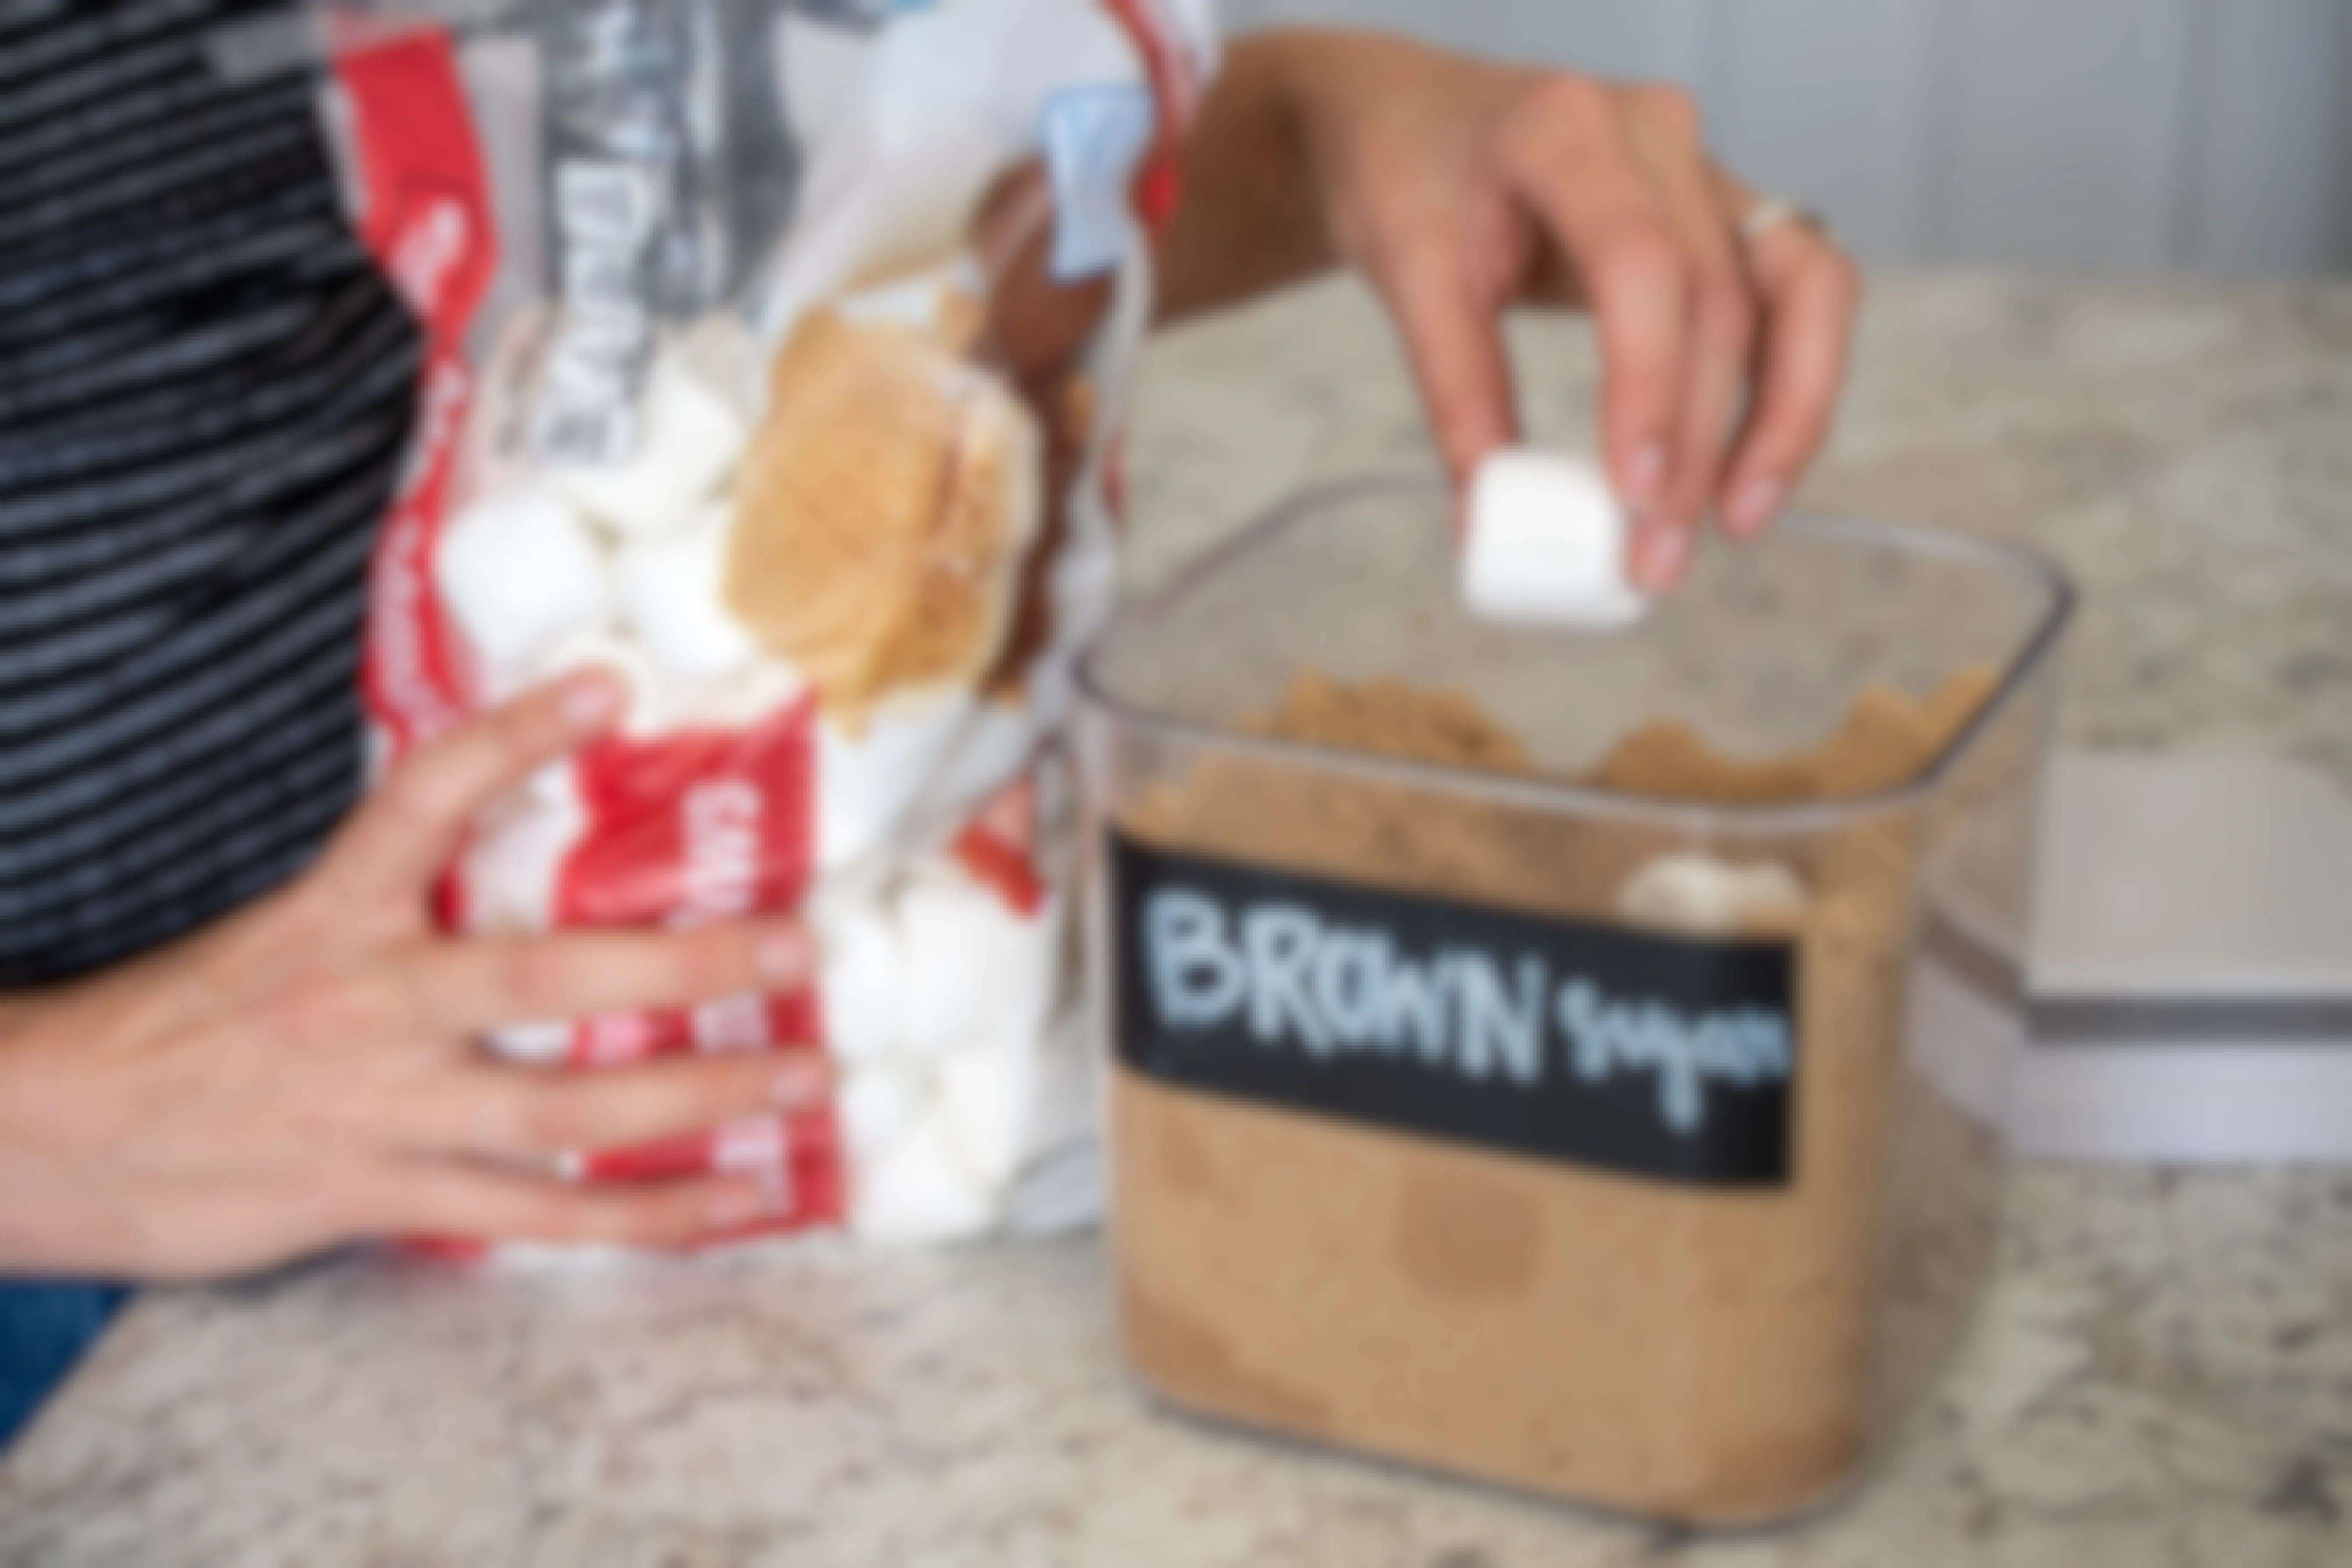 A person putting two large marshmallows inside a container filled with brown sugar.